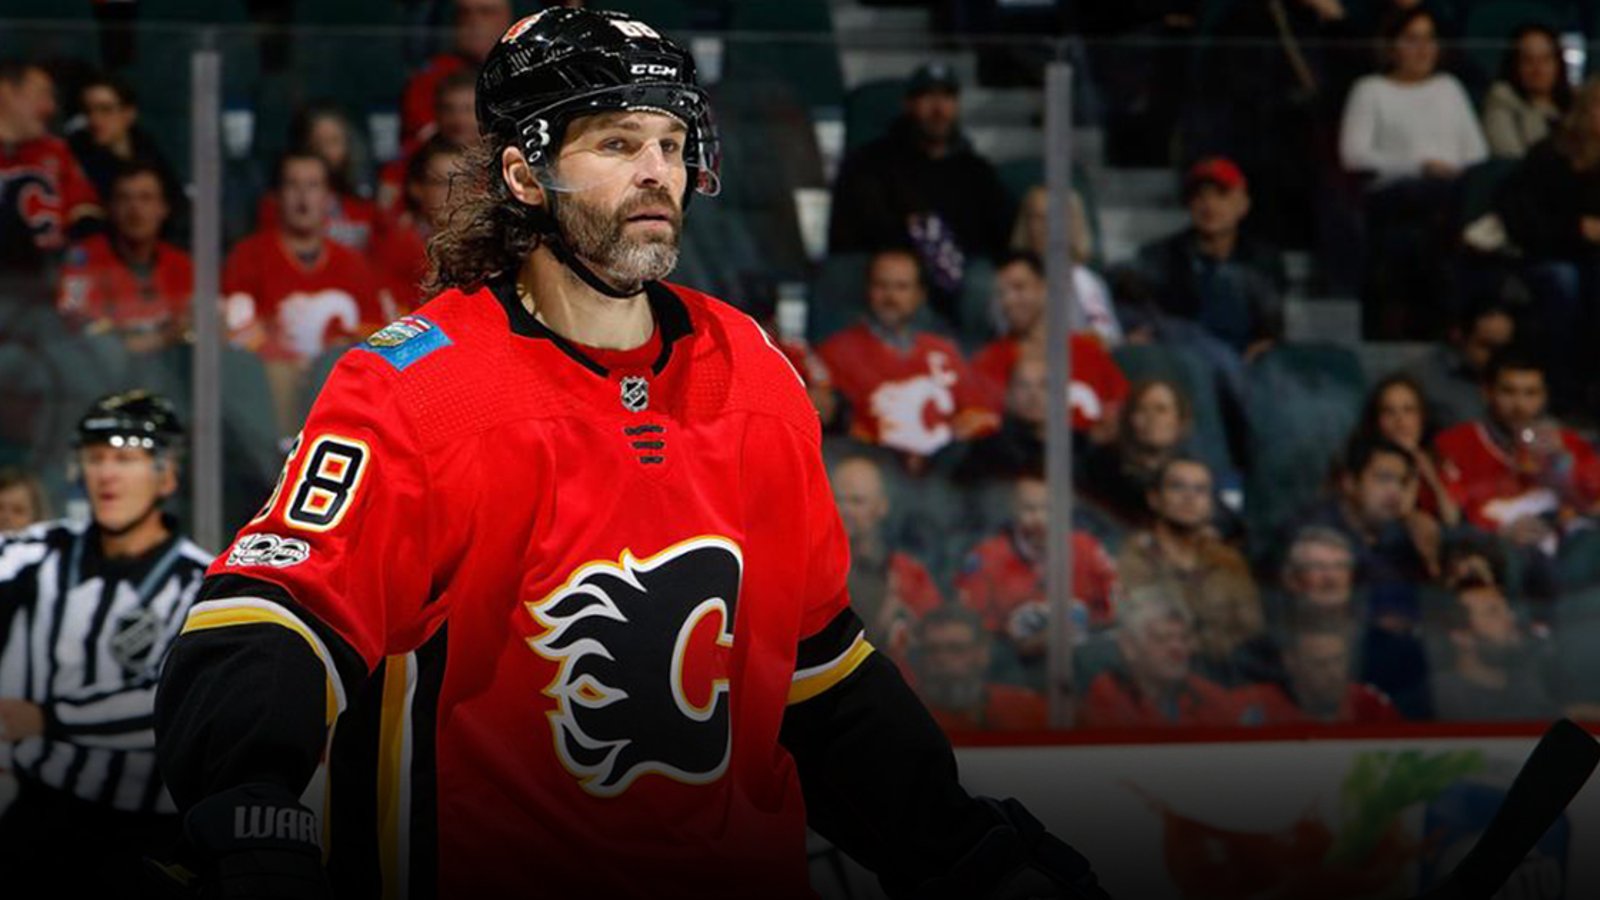 Jaromir Jagr has no regrets about his past and no plans for his future